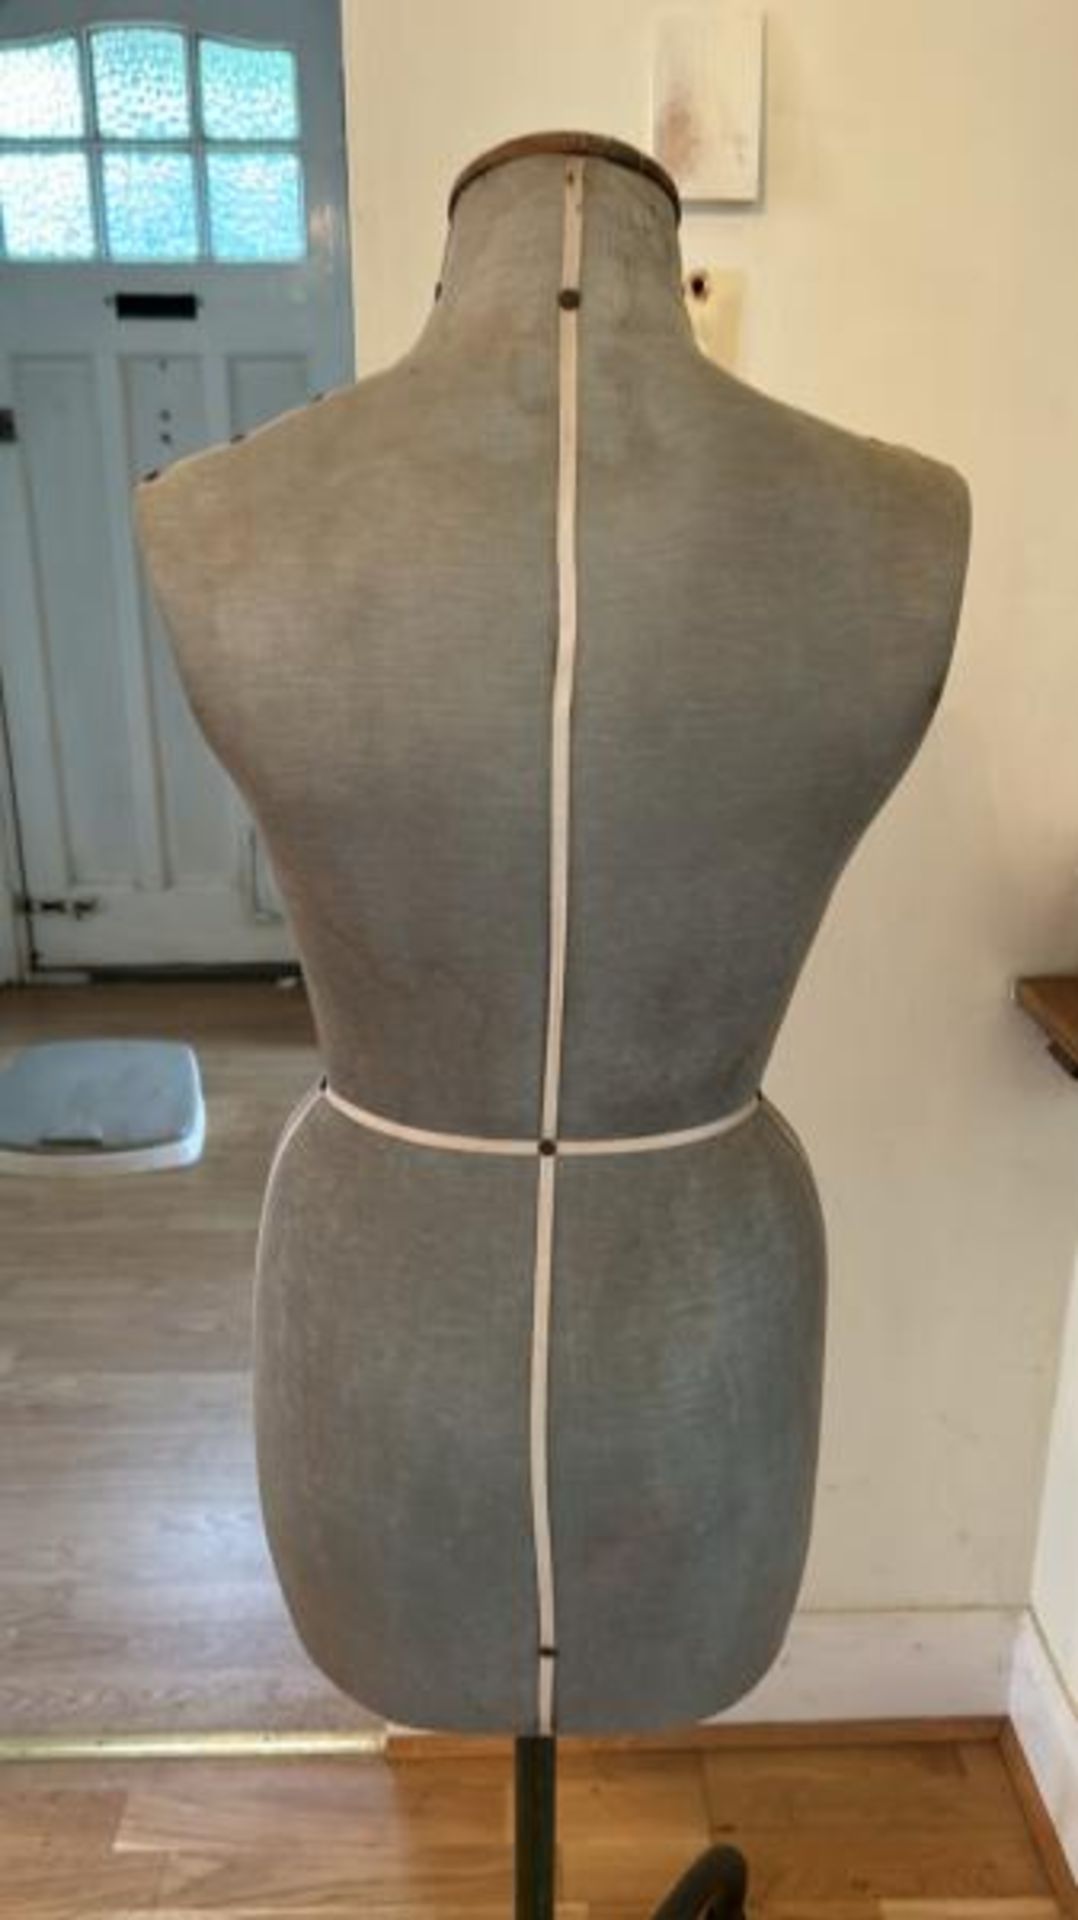 Vintage Singer dress makers mannequin (collection from private residence in Weybridge, Surrey) - Bild 5 aus 6